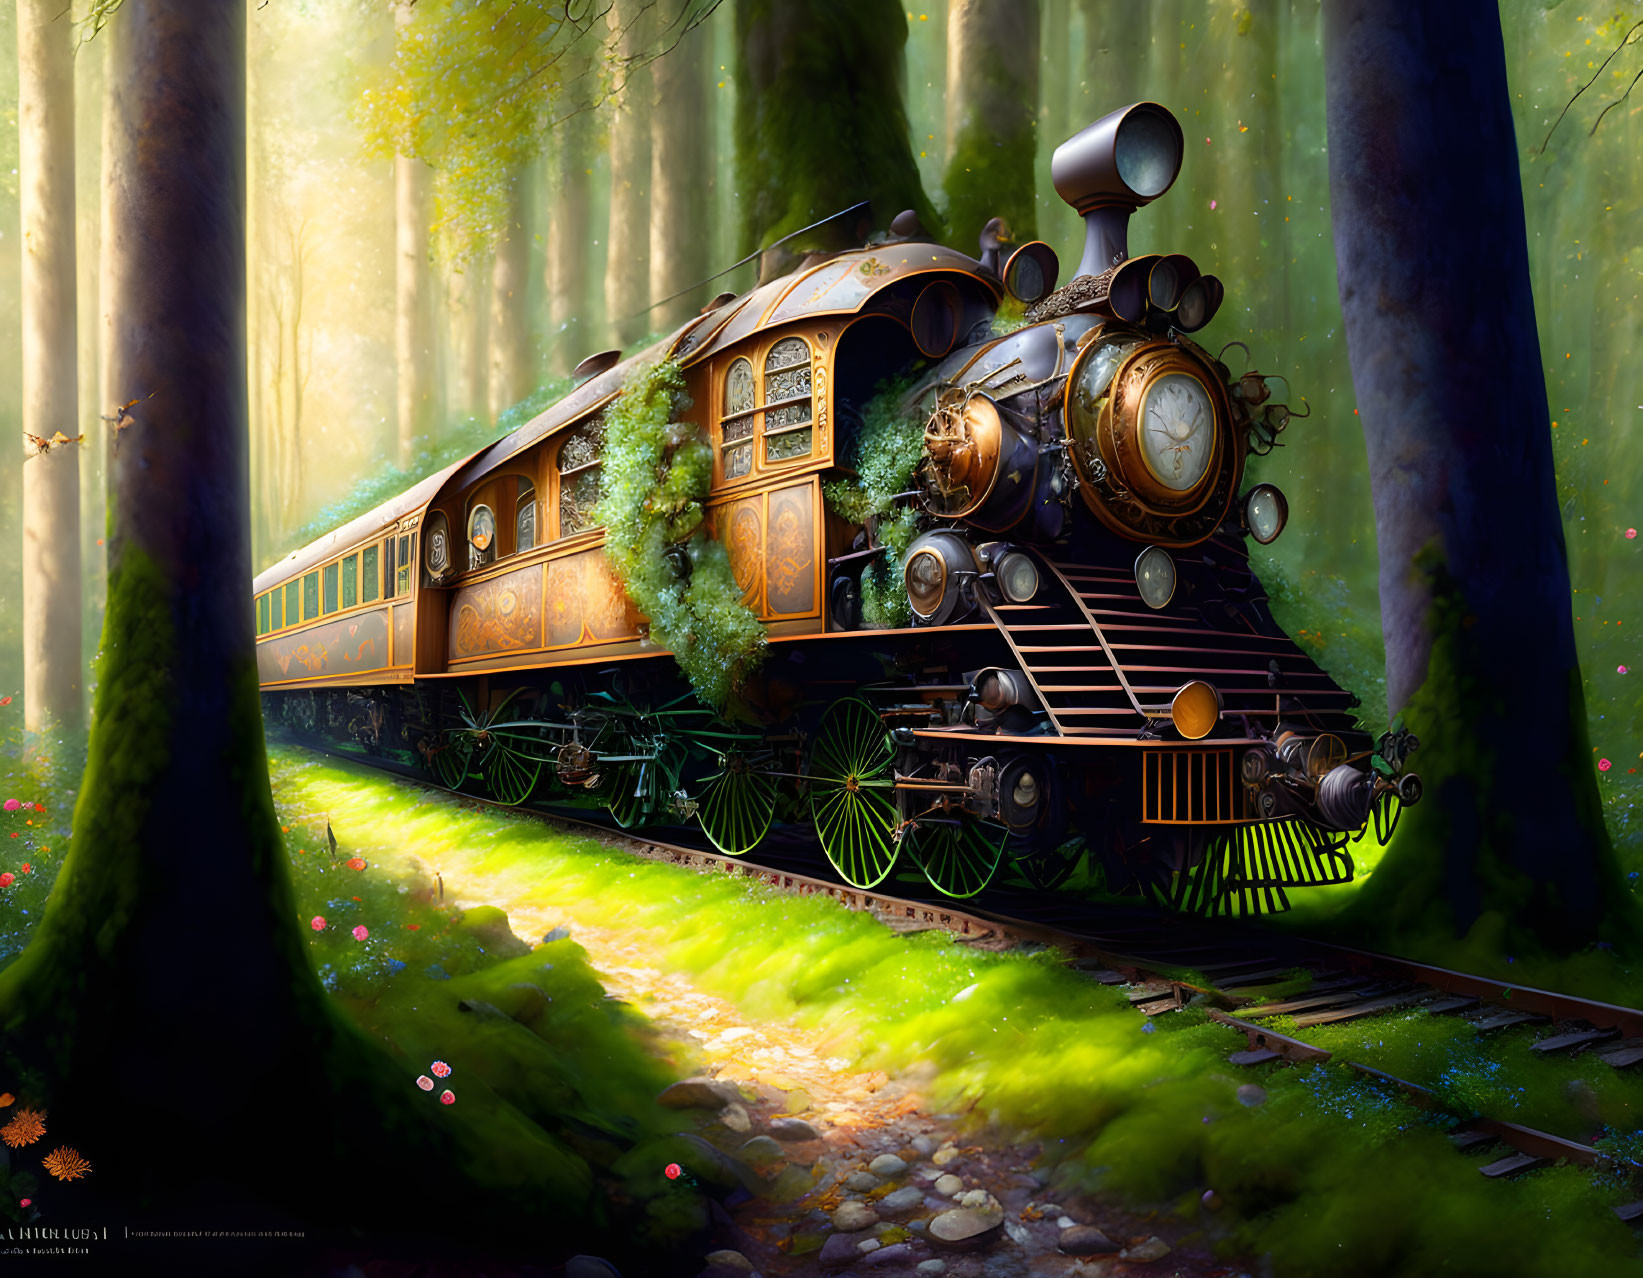 Vintage Train in Mystical Forest with Sunbeams